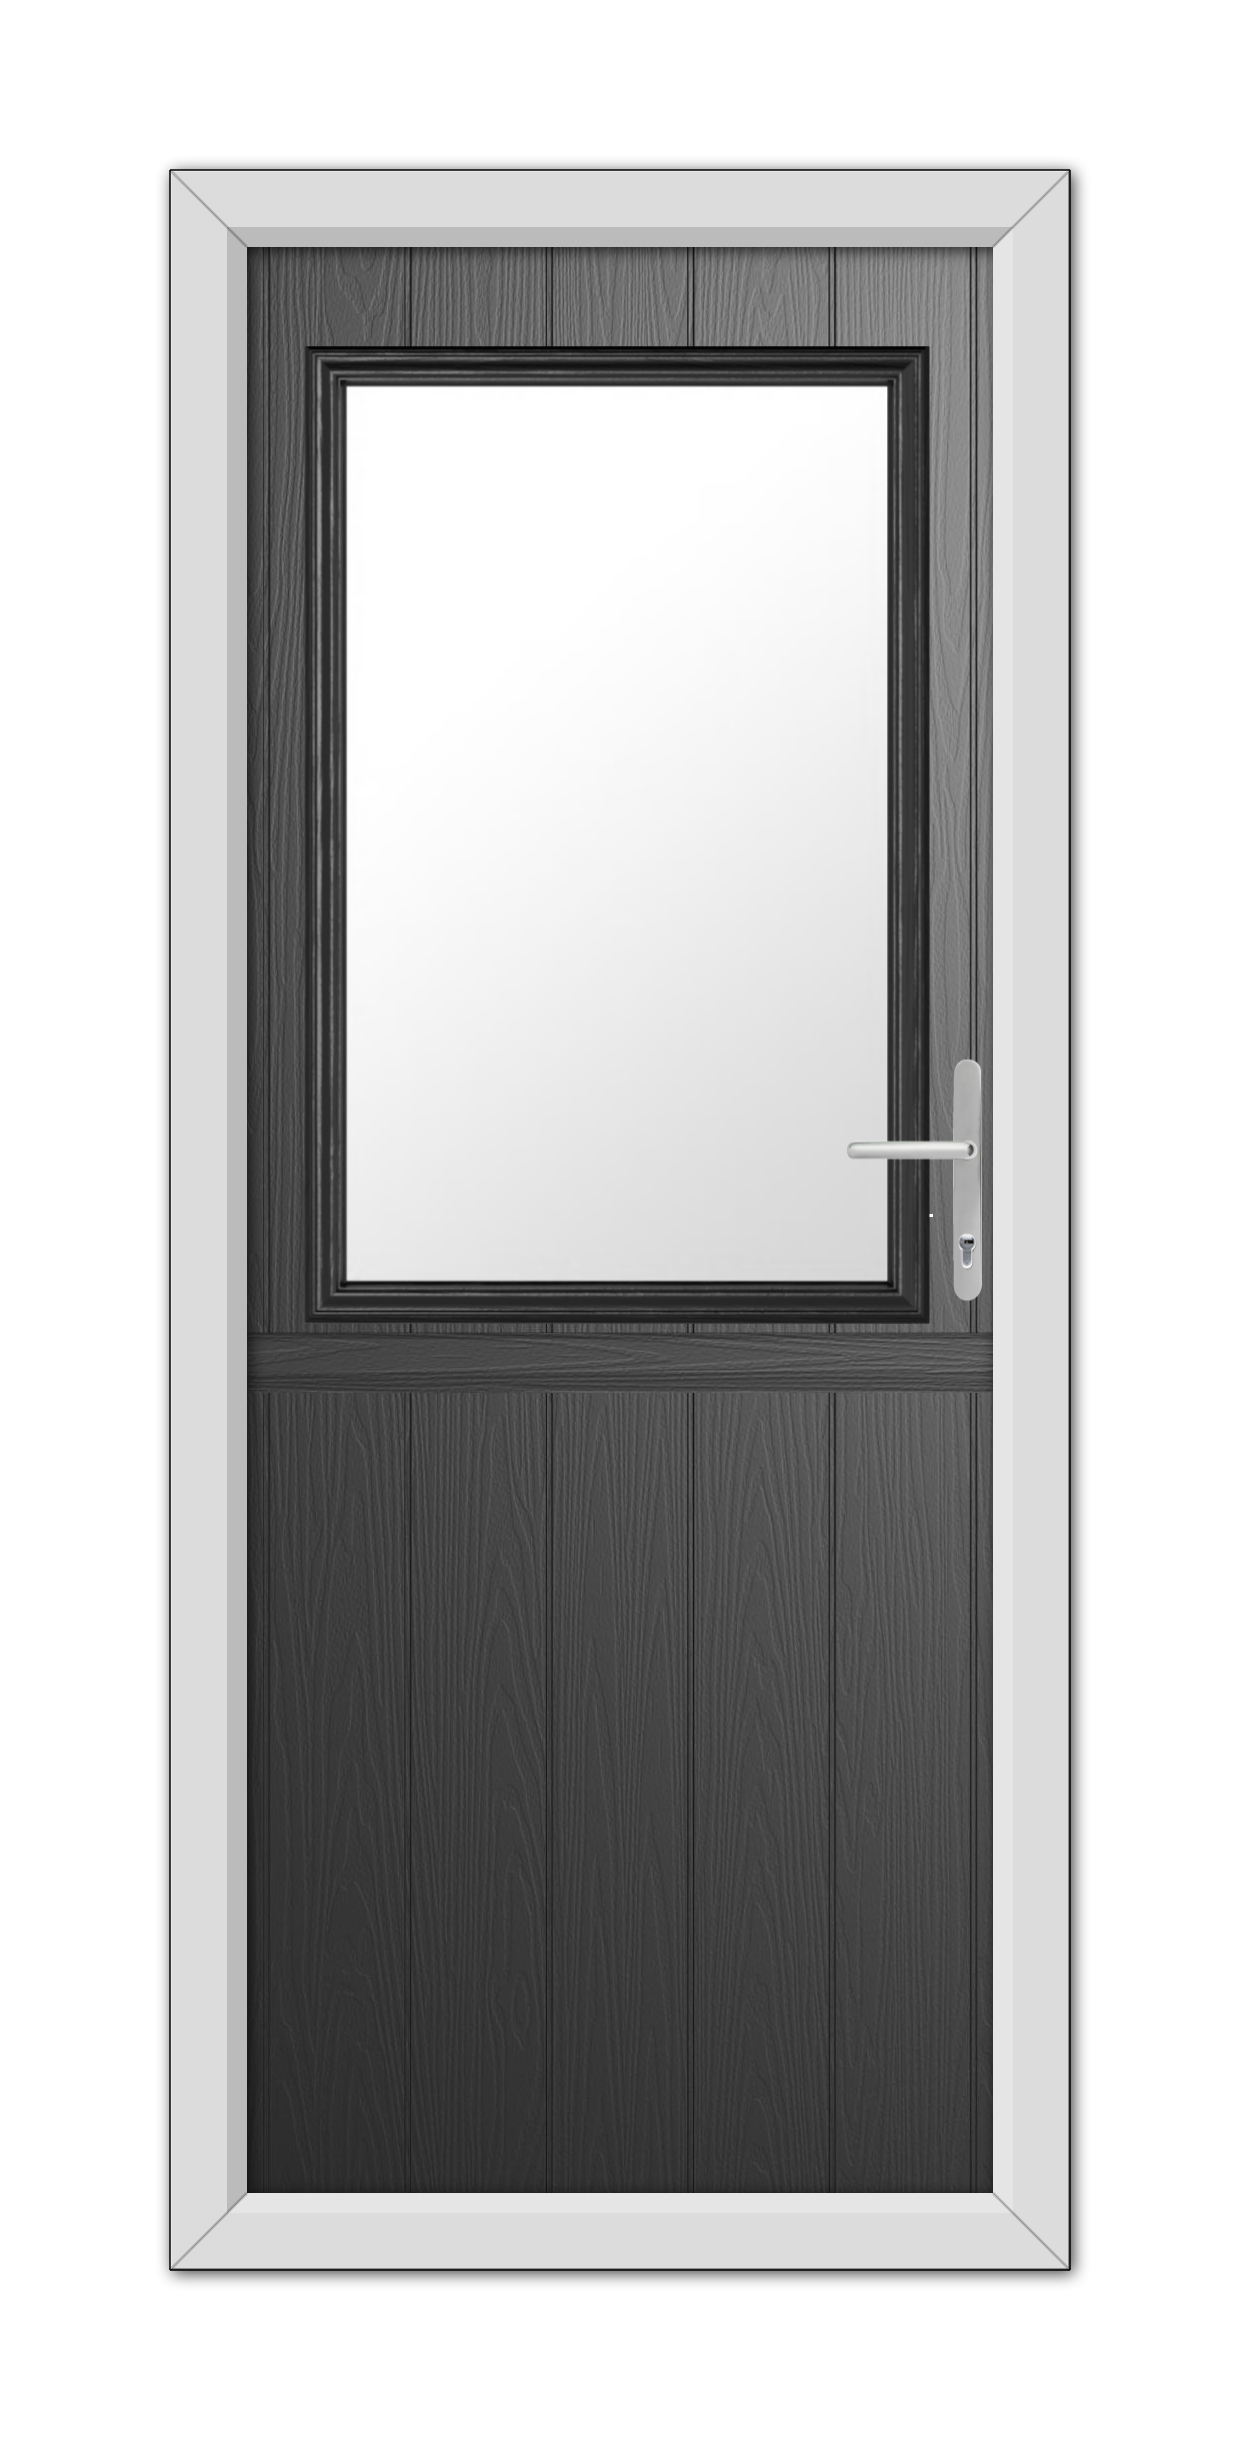 A modern Black Clifton Stable Composite Door 48mm Timber Core with a rectangular window and a metallic handle, set in a white frame.